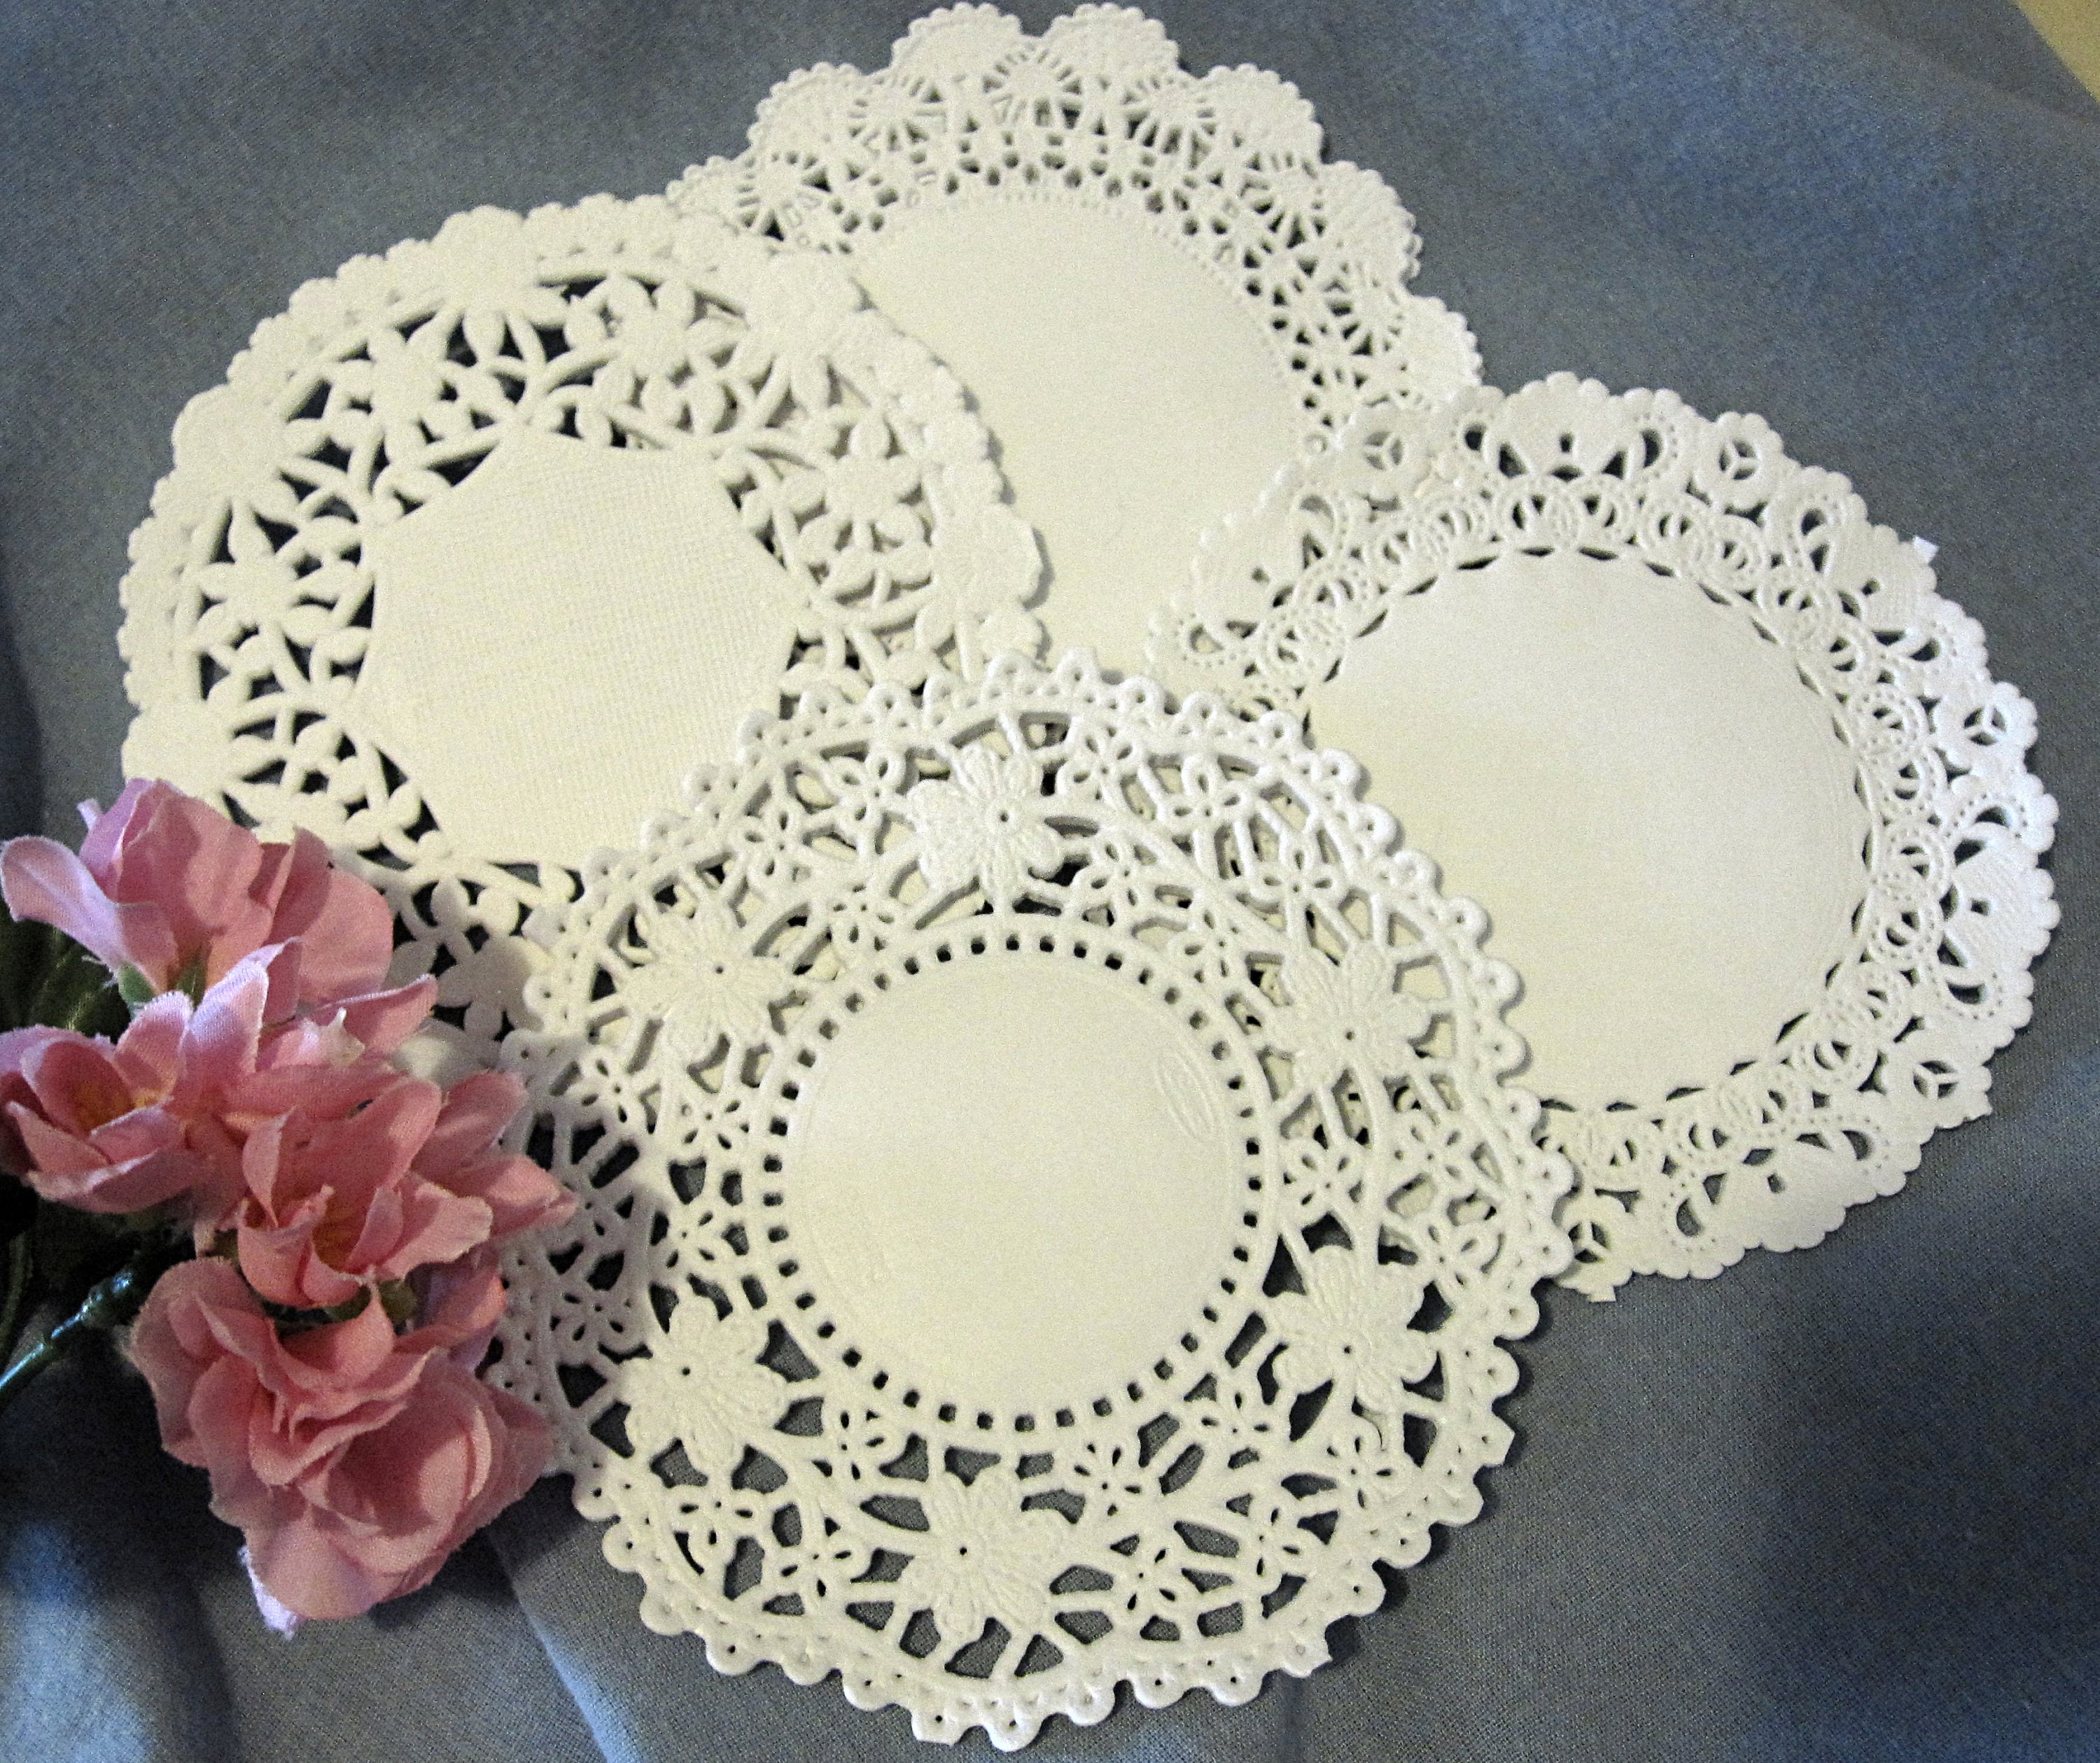 4 Inch Silver Round Lancaster Paper Doilies 100 Count